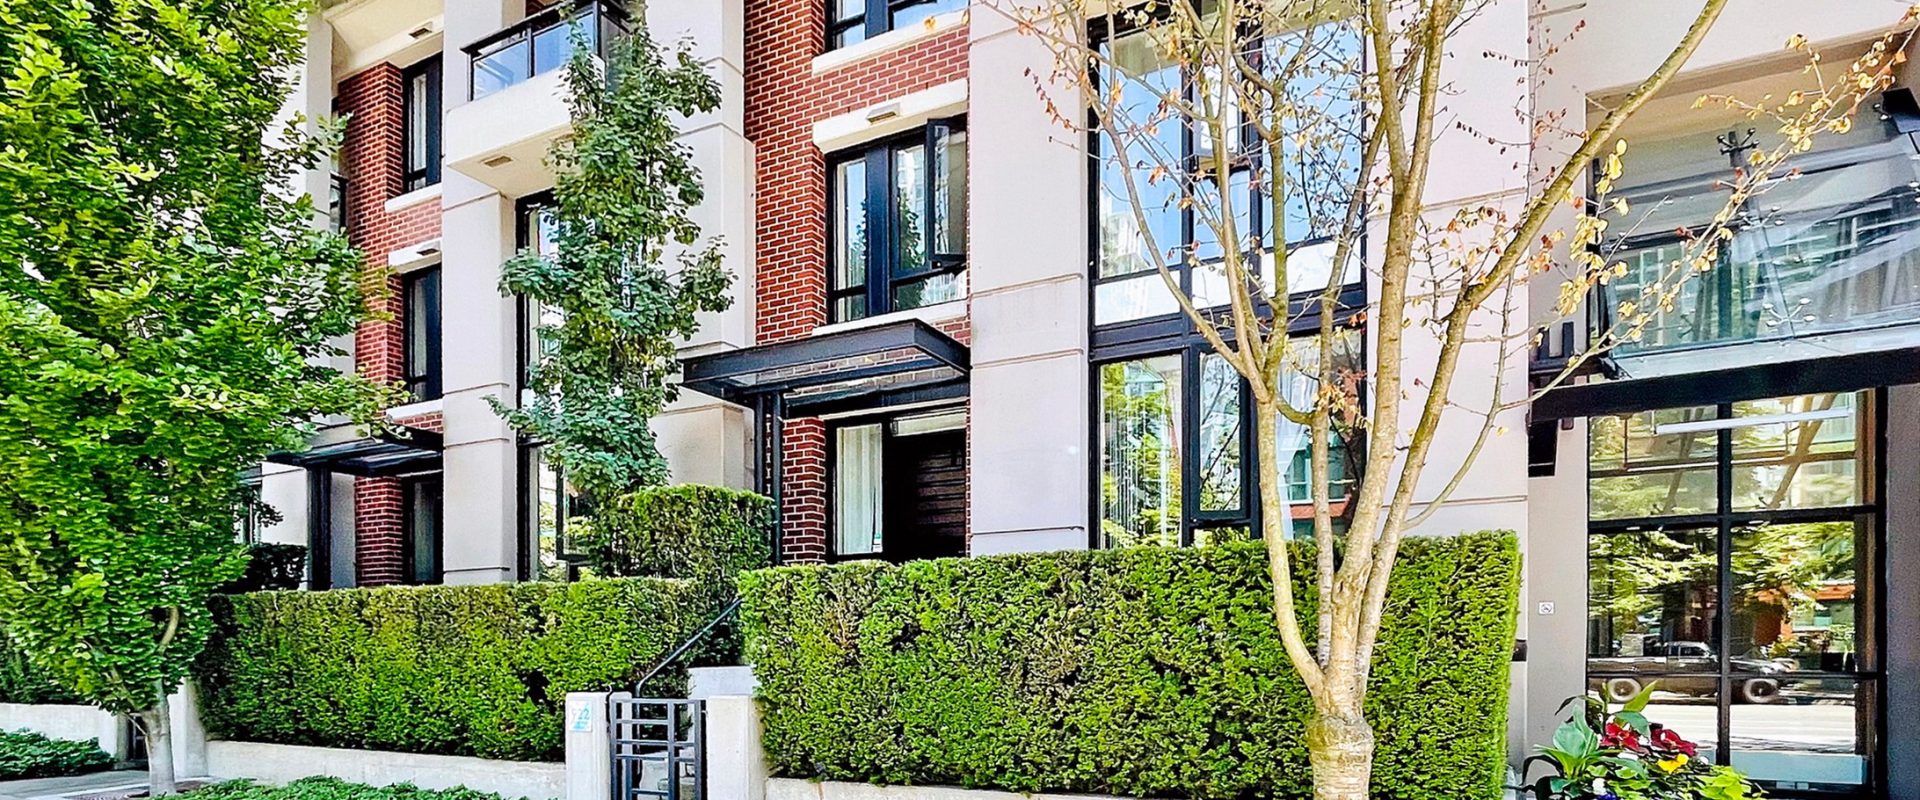 Yaletown Luxury Townhouse For Sale!